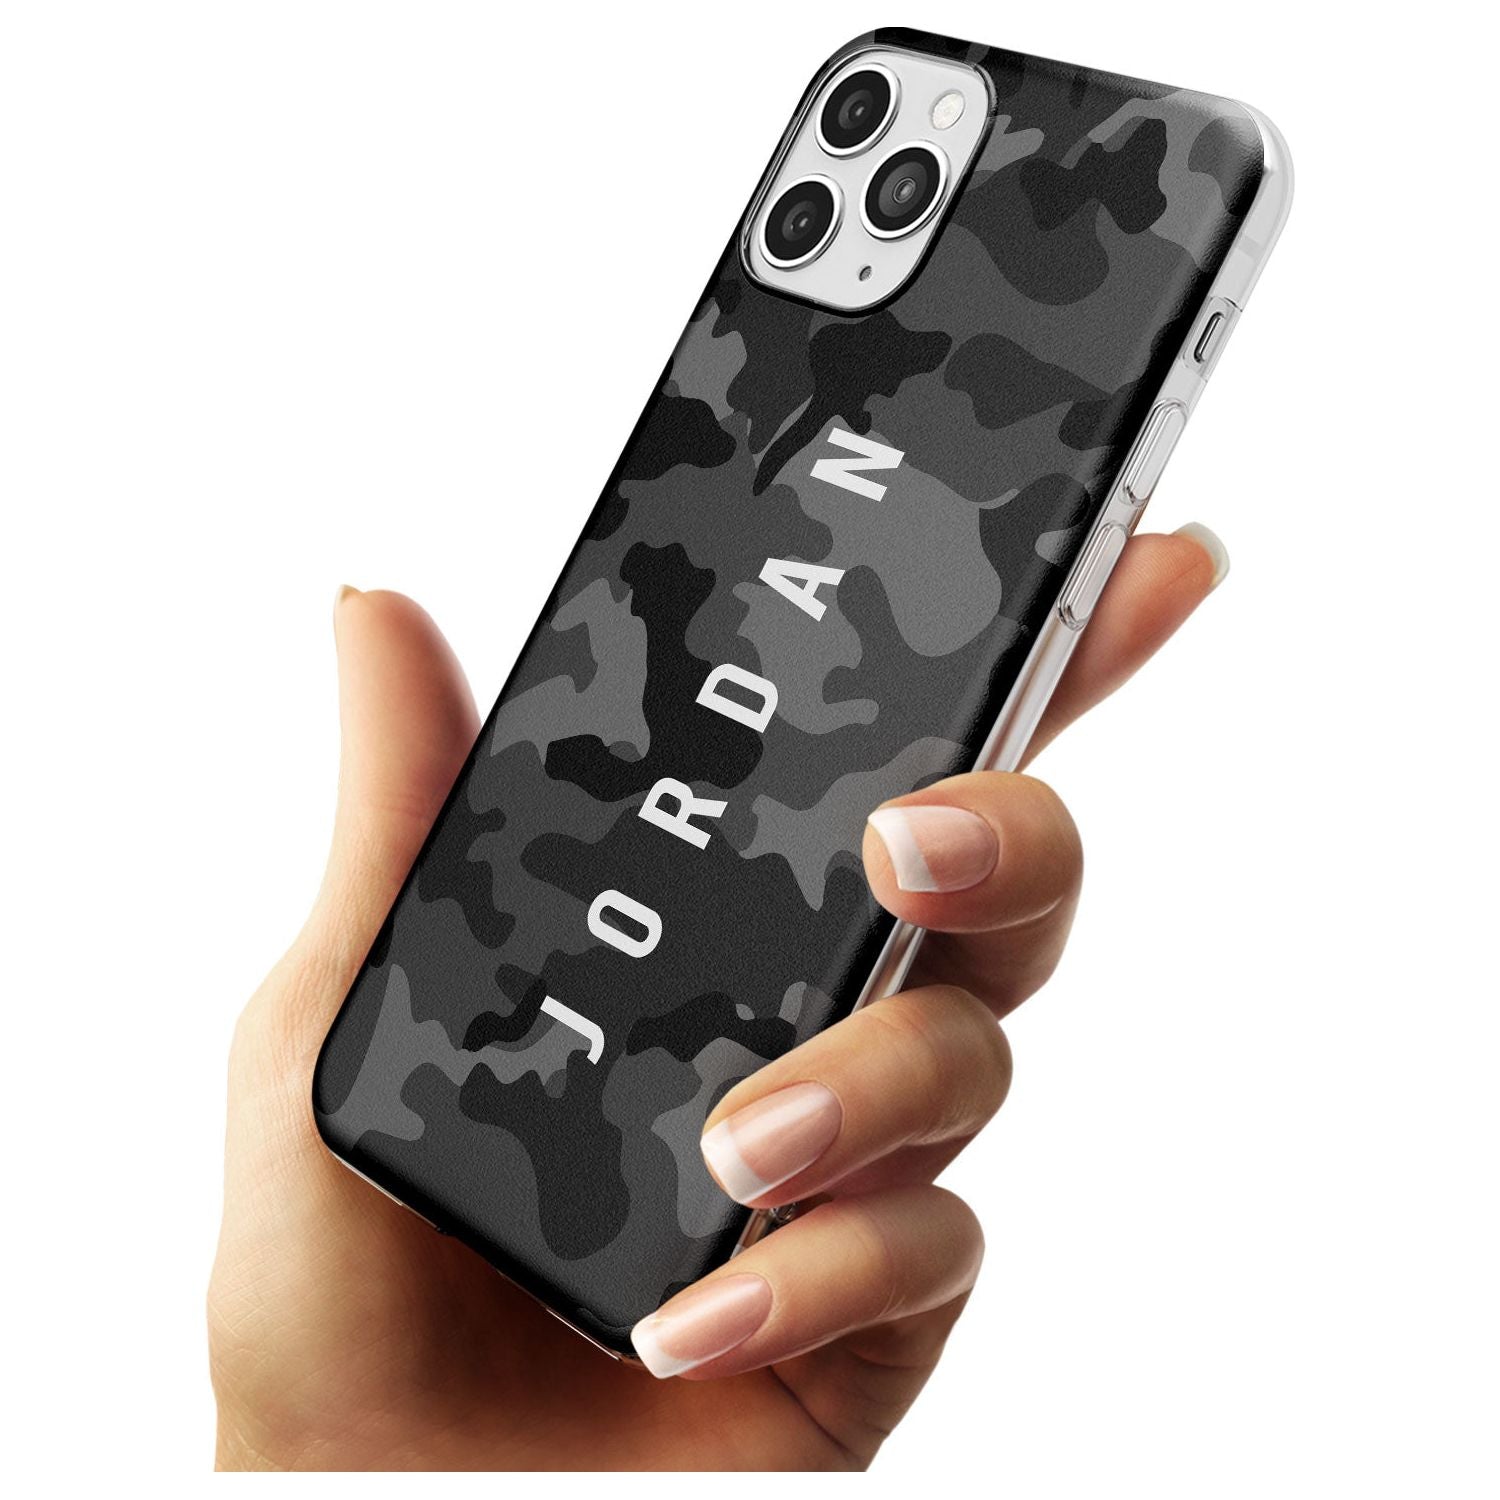 Small Vertical Name Personalised Black Camouflage Slim TPU Phone Case for iPhone 11 Pro Max